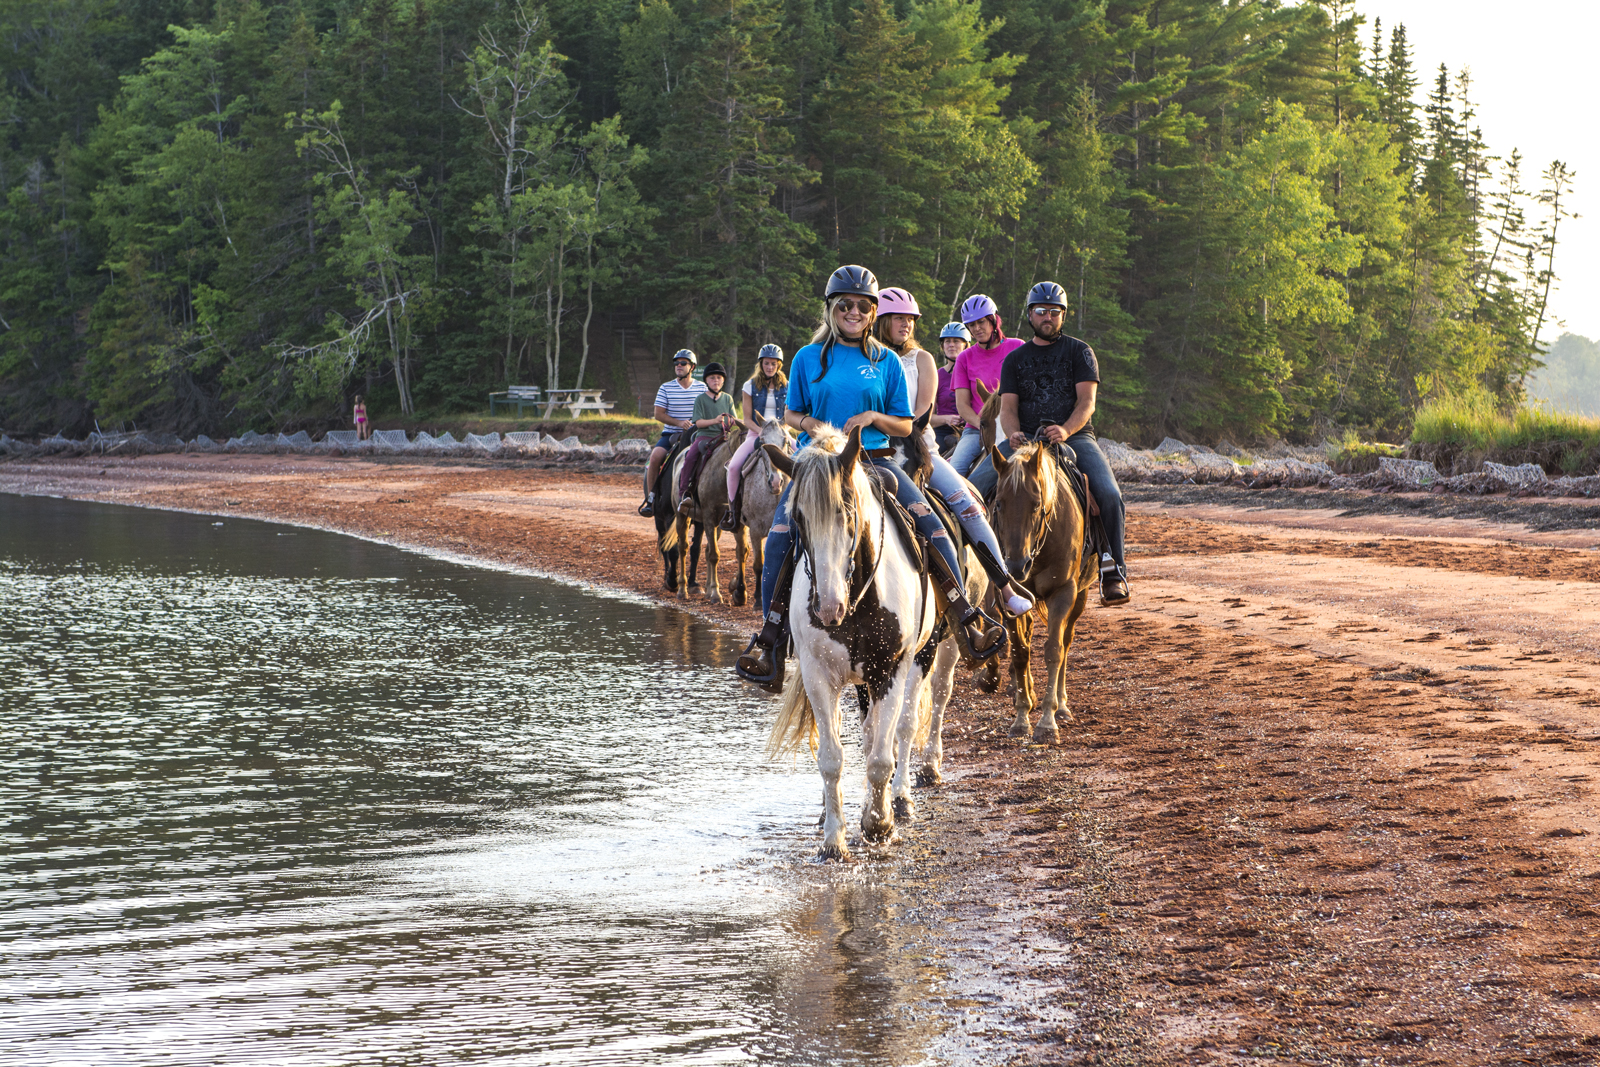 A group of young people riding horses along a lakeshore with tall trees in background.